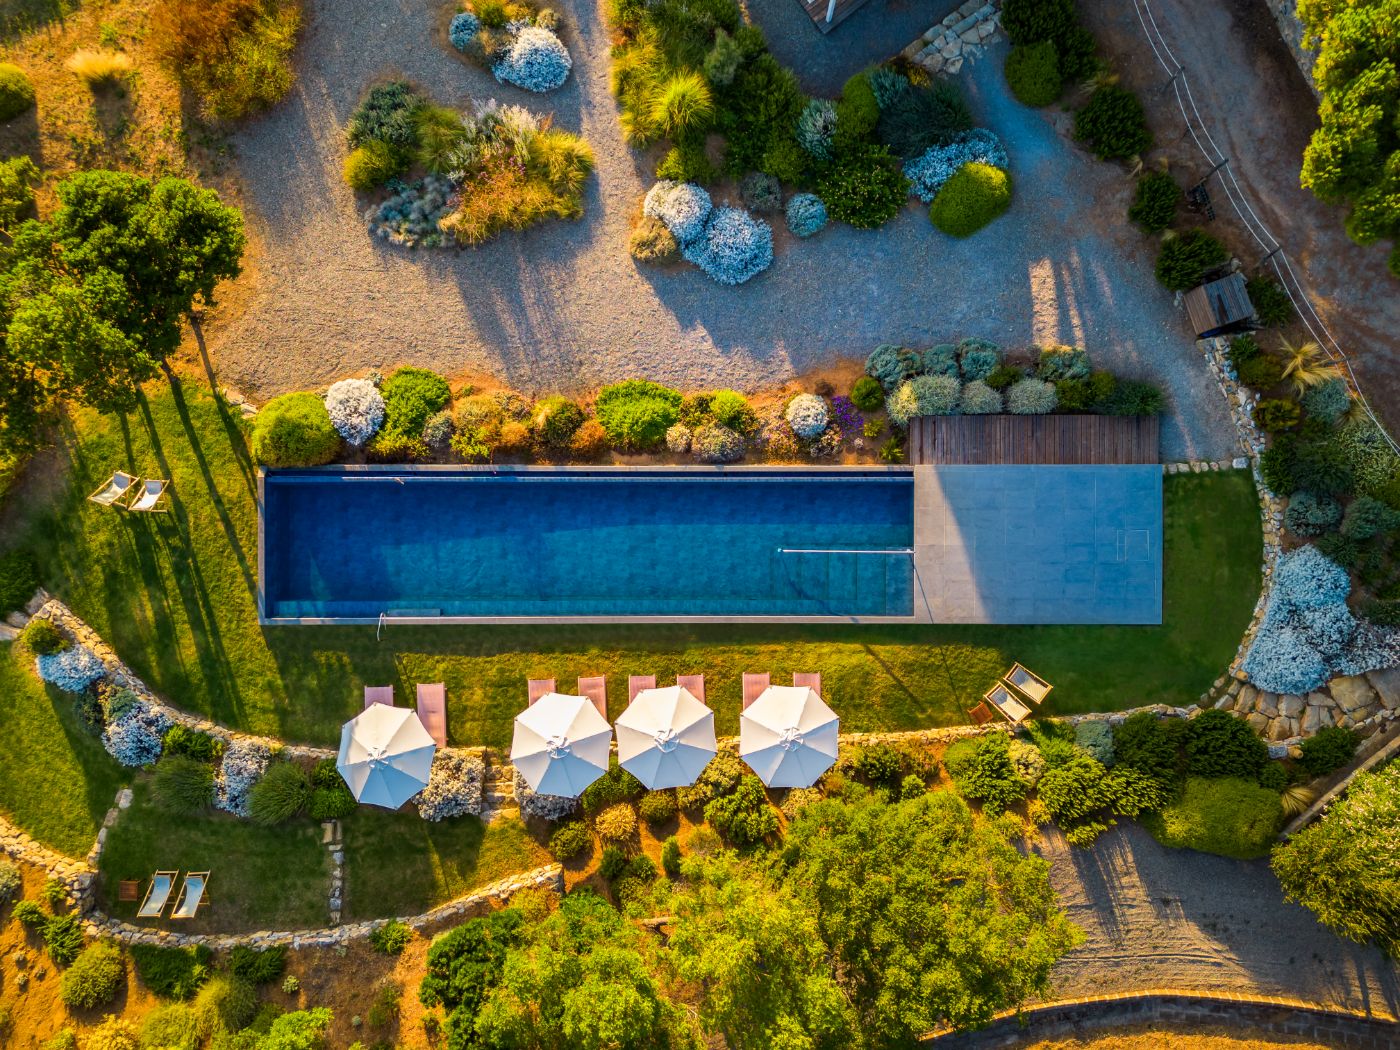 A top down view of the pool at Villa Montecristo.